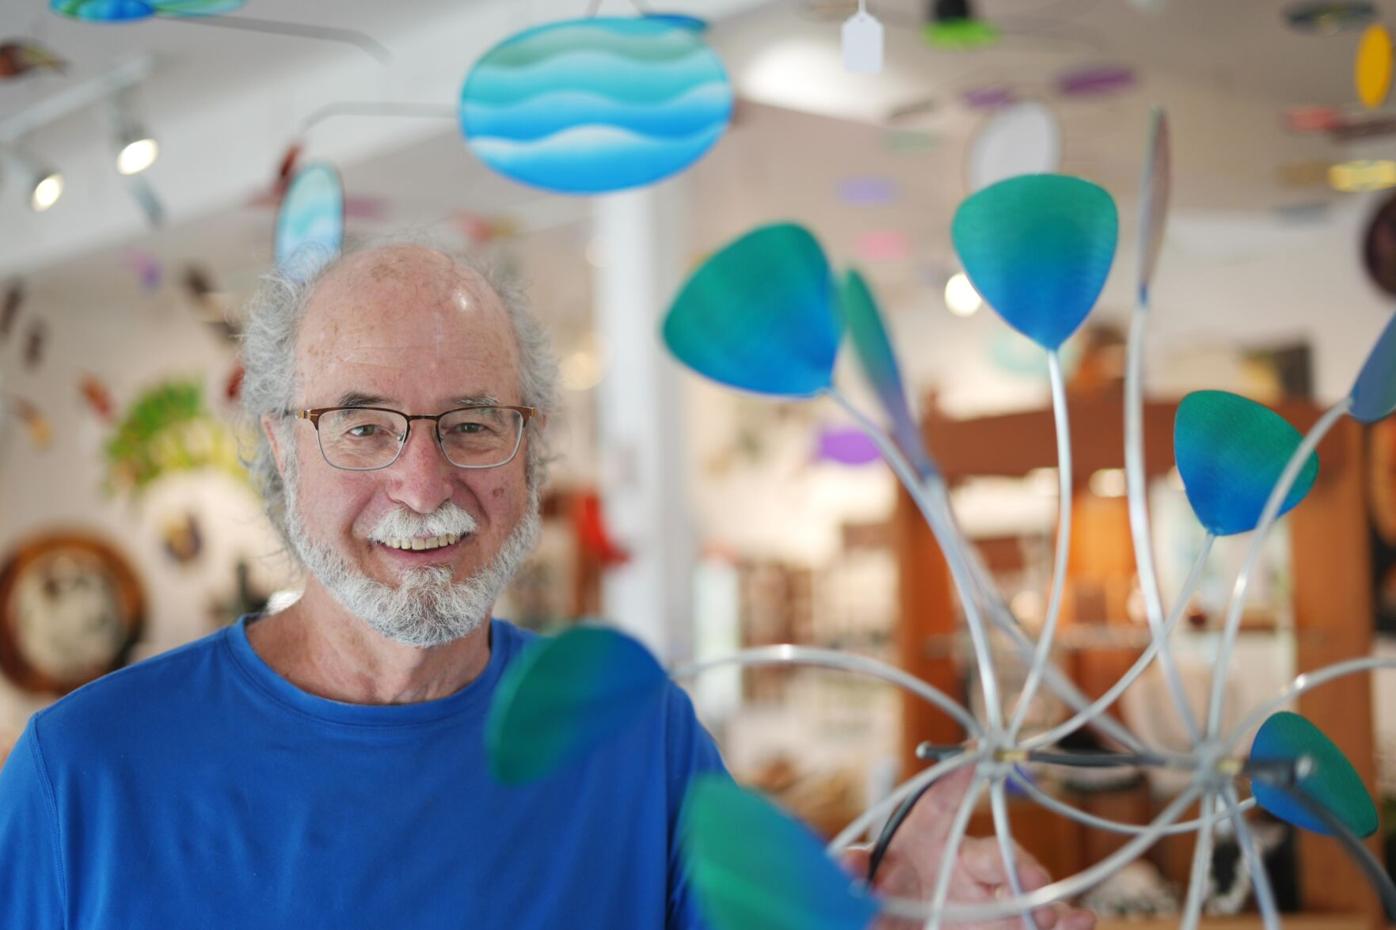 Here's how artist Joel Hotchkiss made mobiles his career and craft, Business